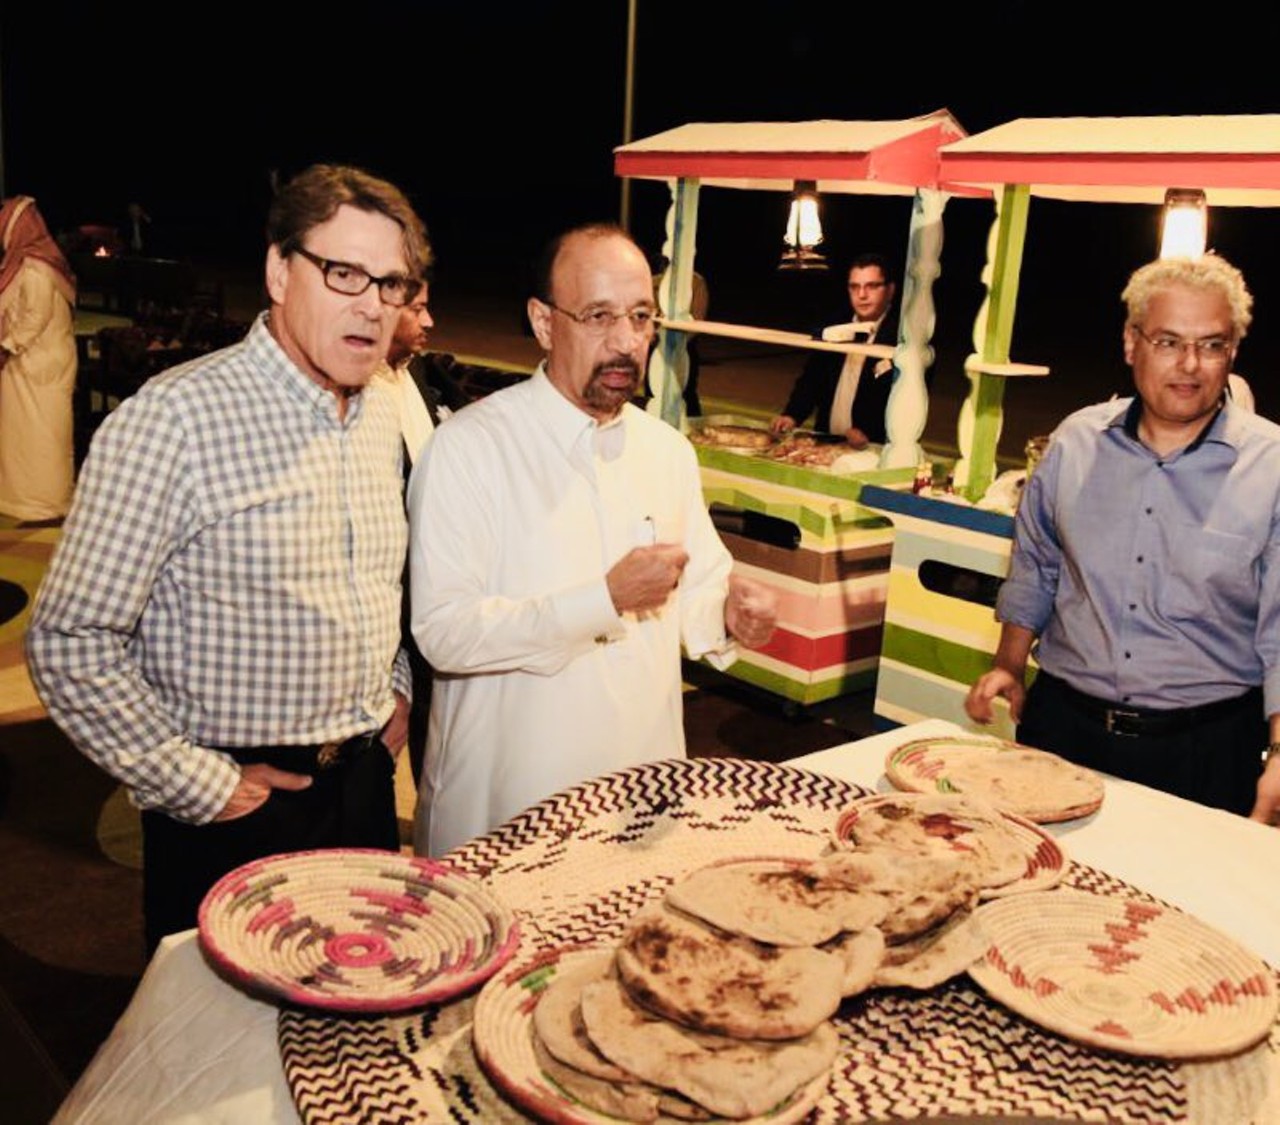 Be with someone who looks at you the way Rick Perry looks at pita bread.